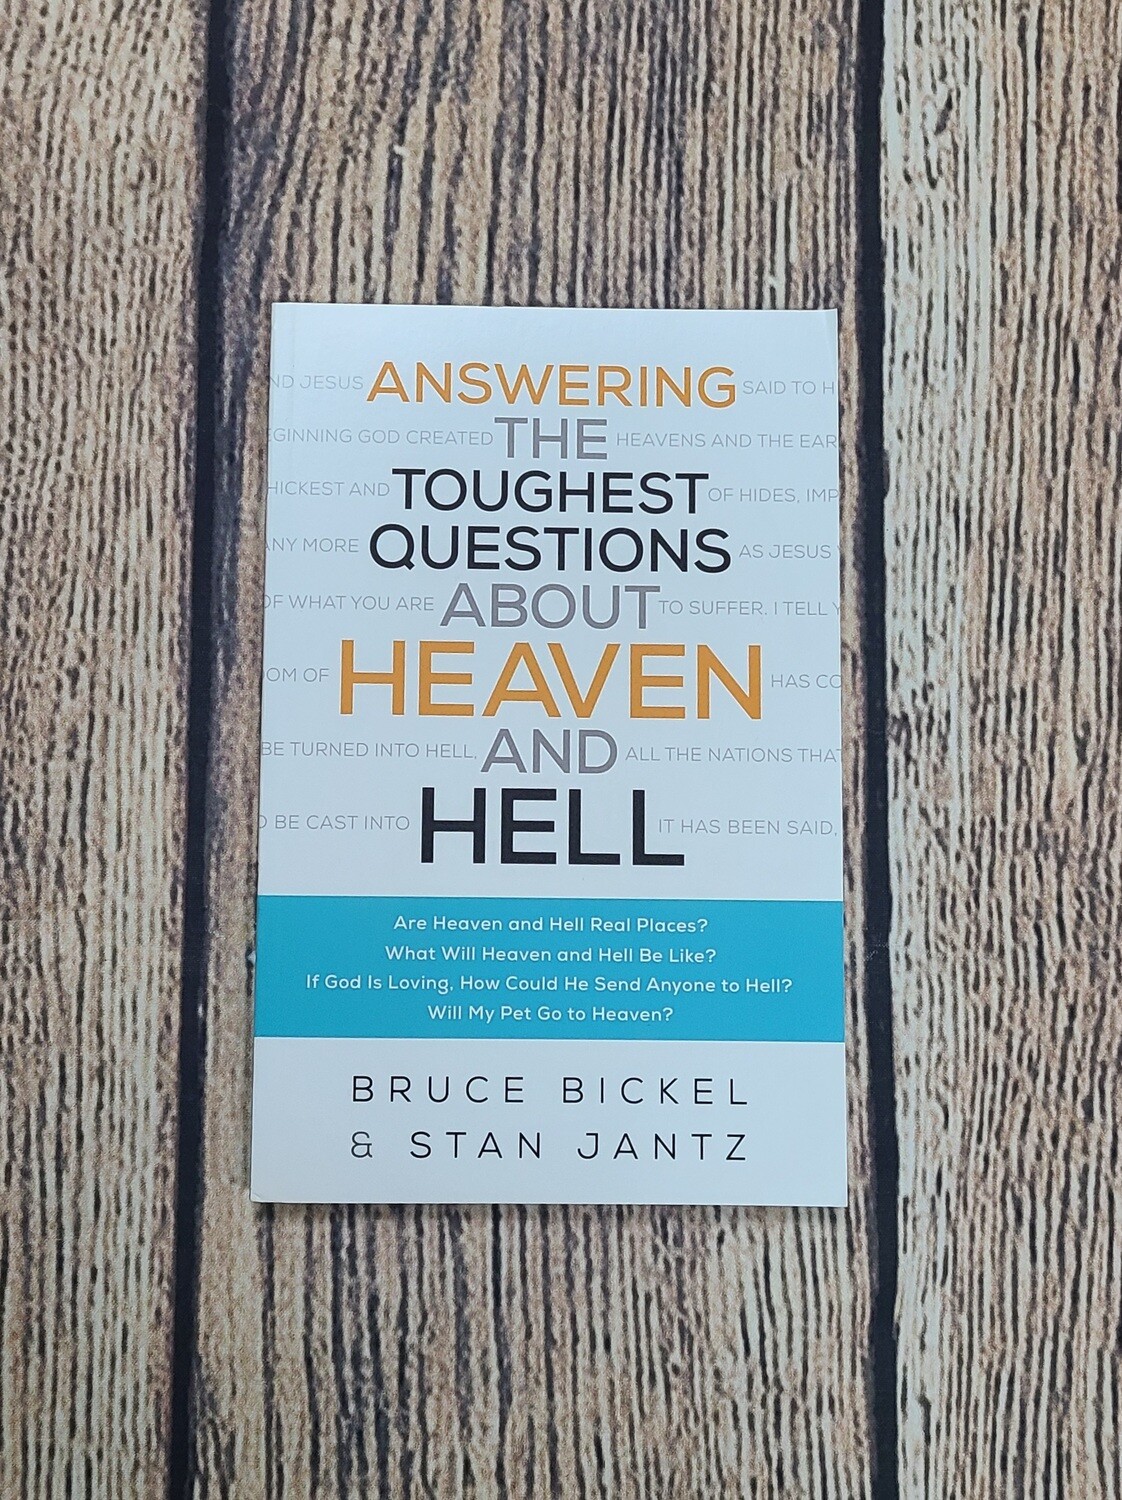 Answering the Toughest Questions About Heaven and Hell by Bruce Bickel and Stan Jantz